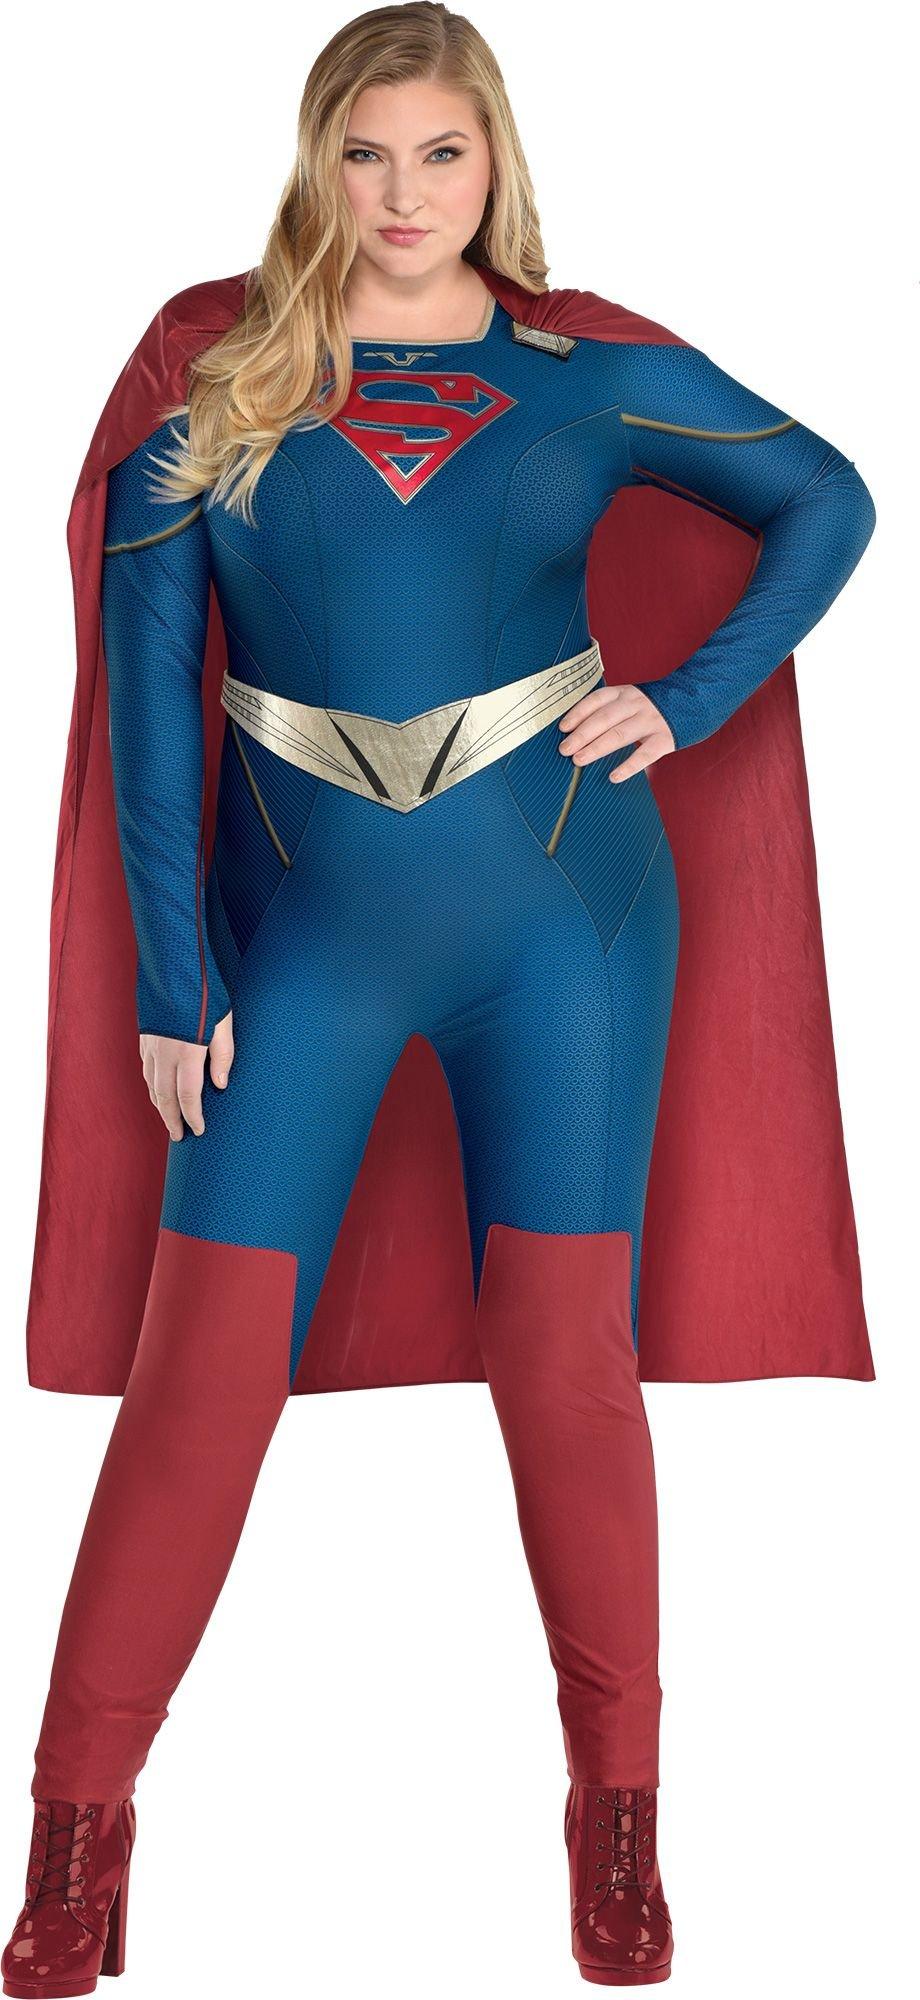 Adult Supergirl Costume Plus Size | Party City